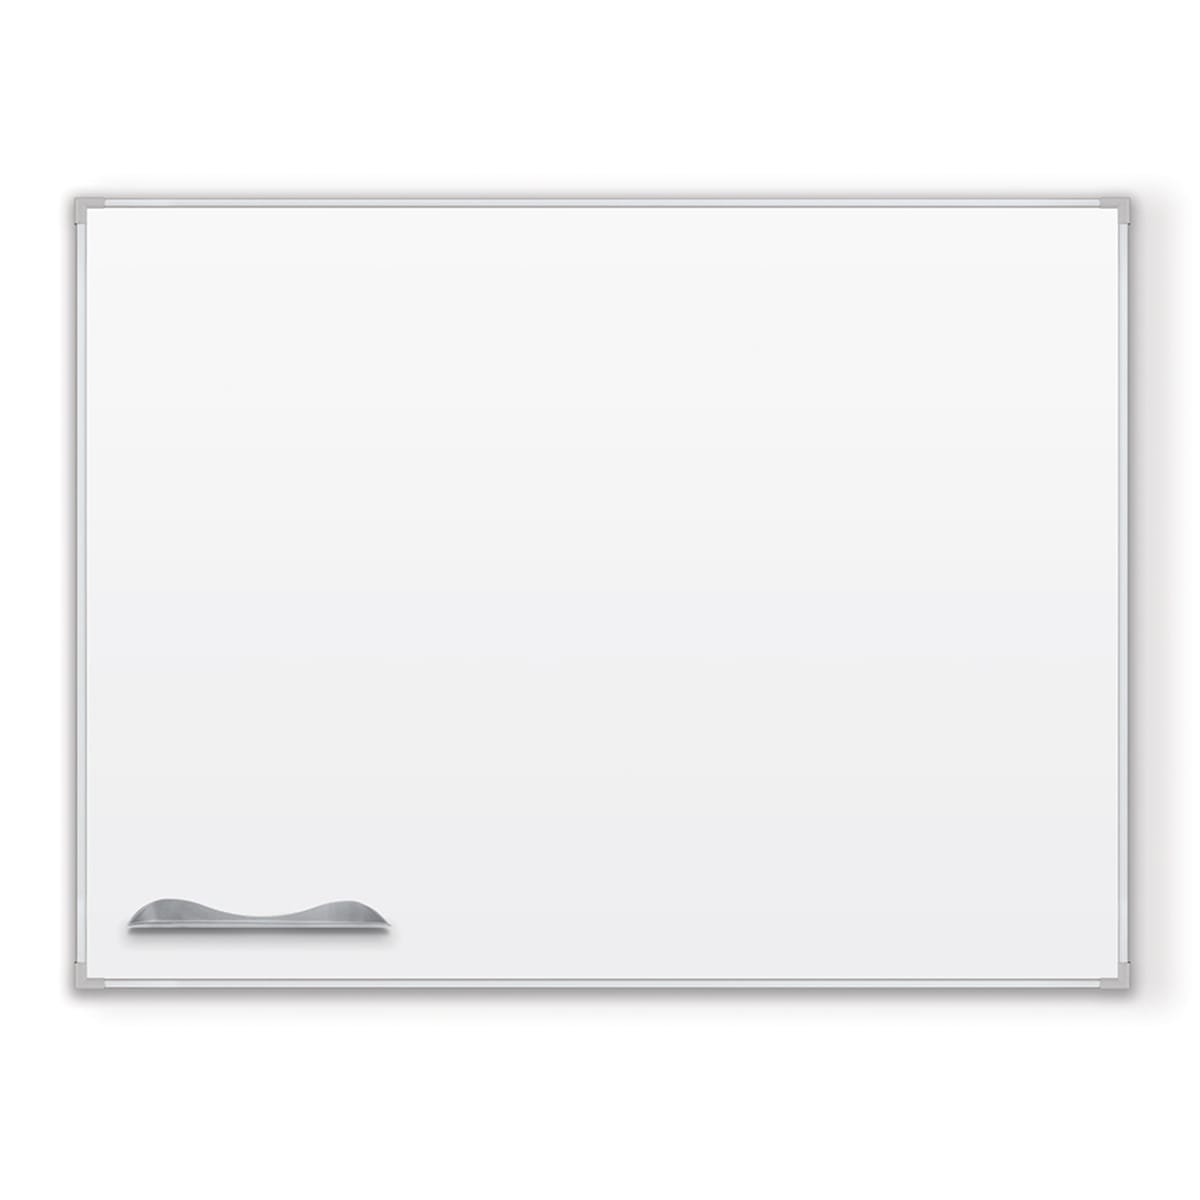 Mooreco Ultra Trim - Porcelain Markerboard Silver - 4'H x 6'W (Mooreco 2029G) - SchoolOutlet